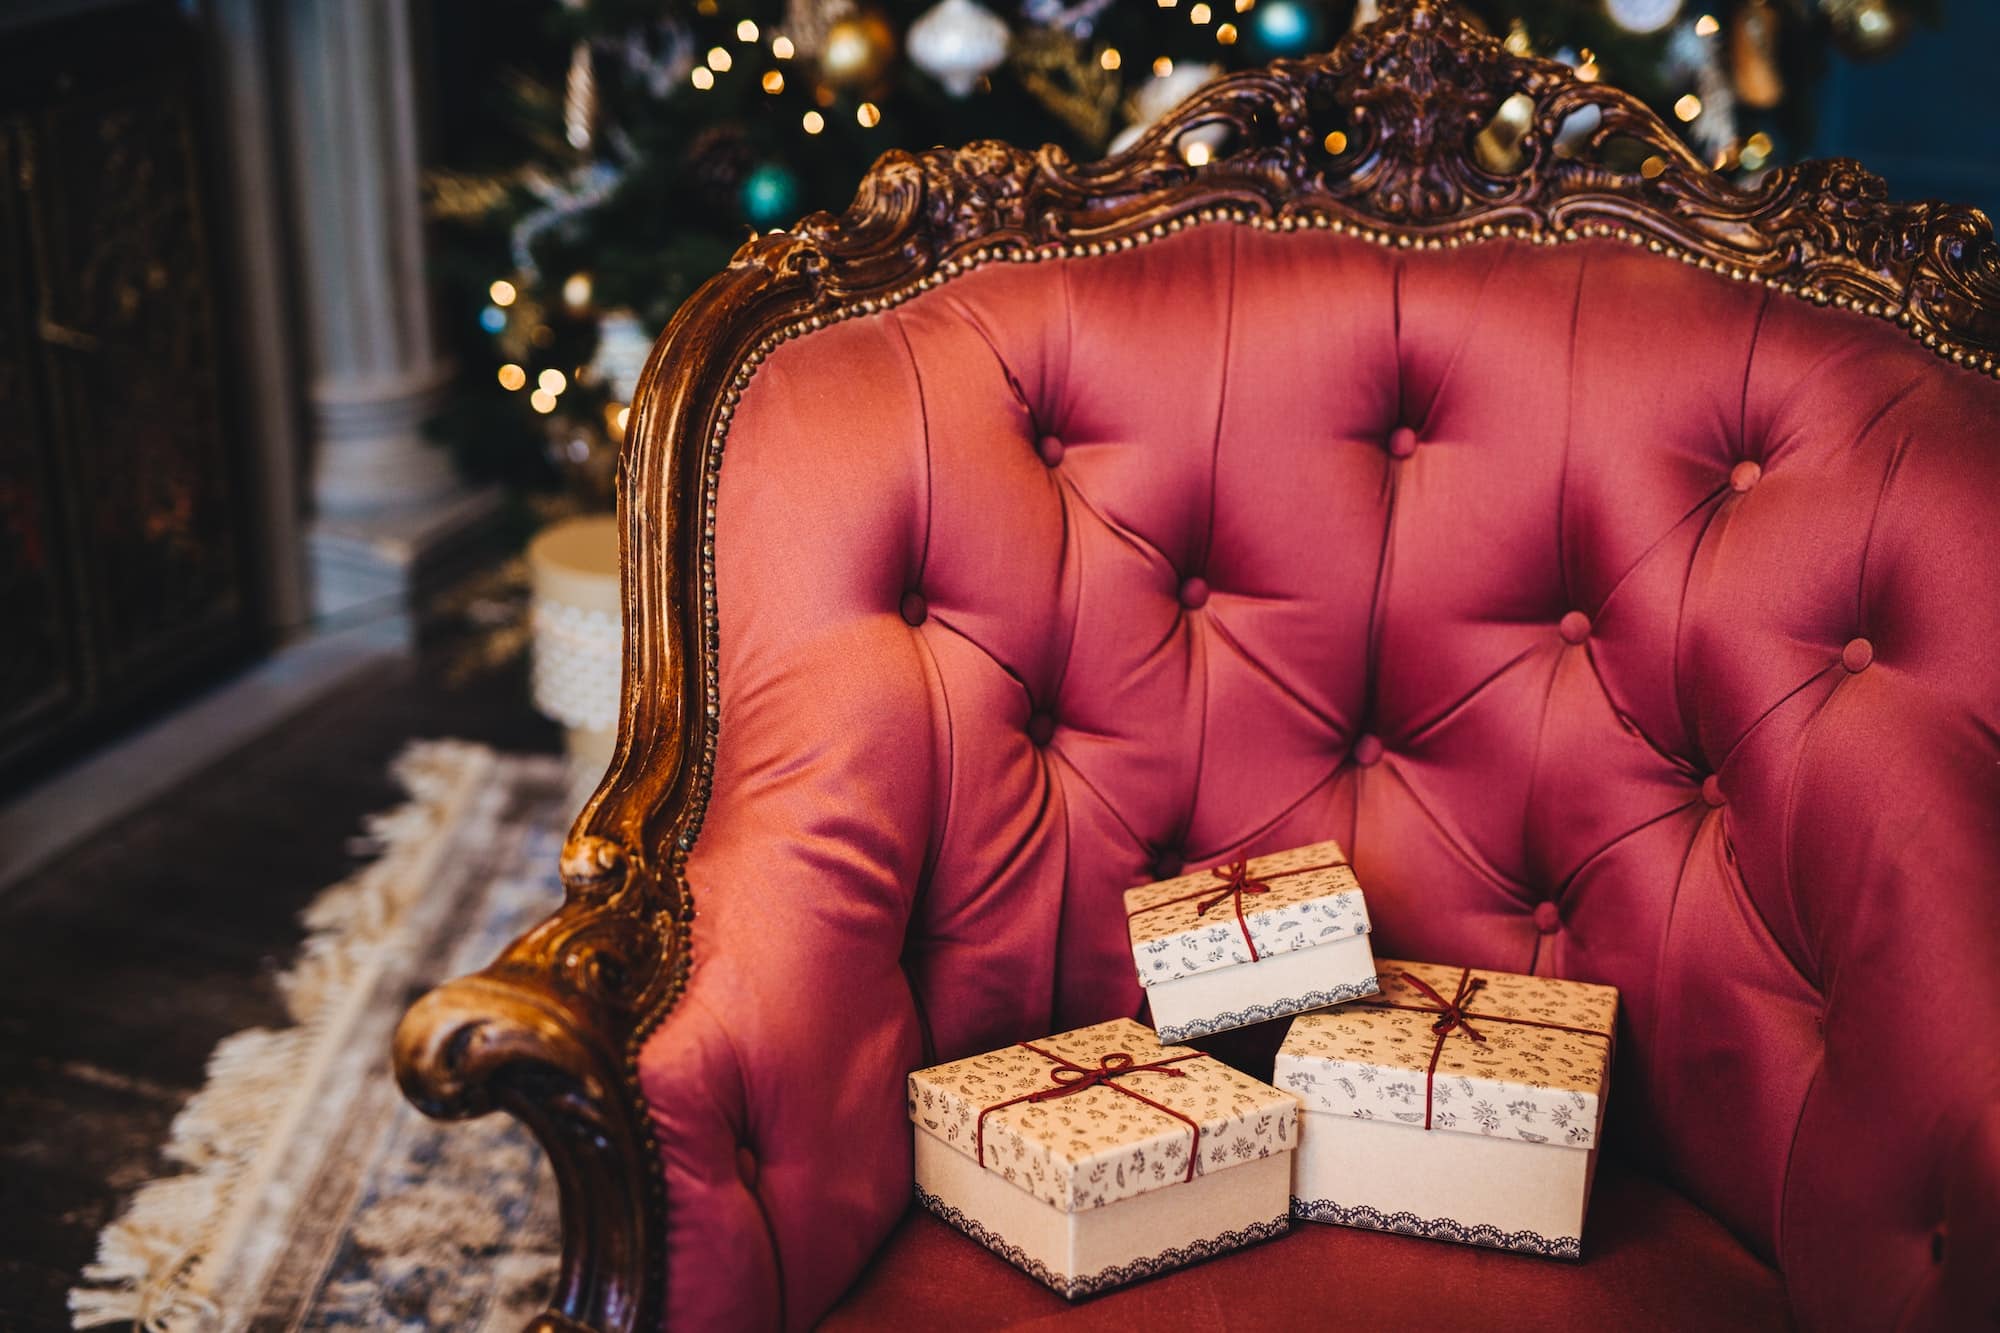 Wrapped three gift boxes on beautiful royal armchair indoors